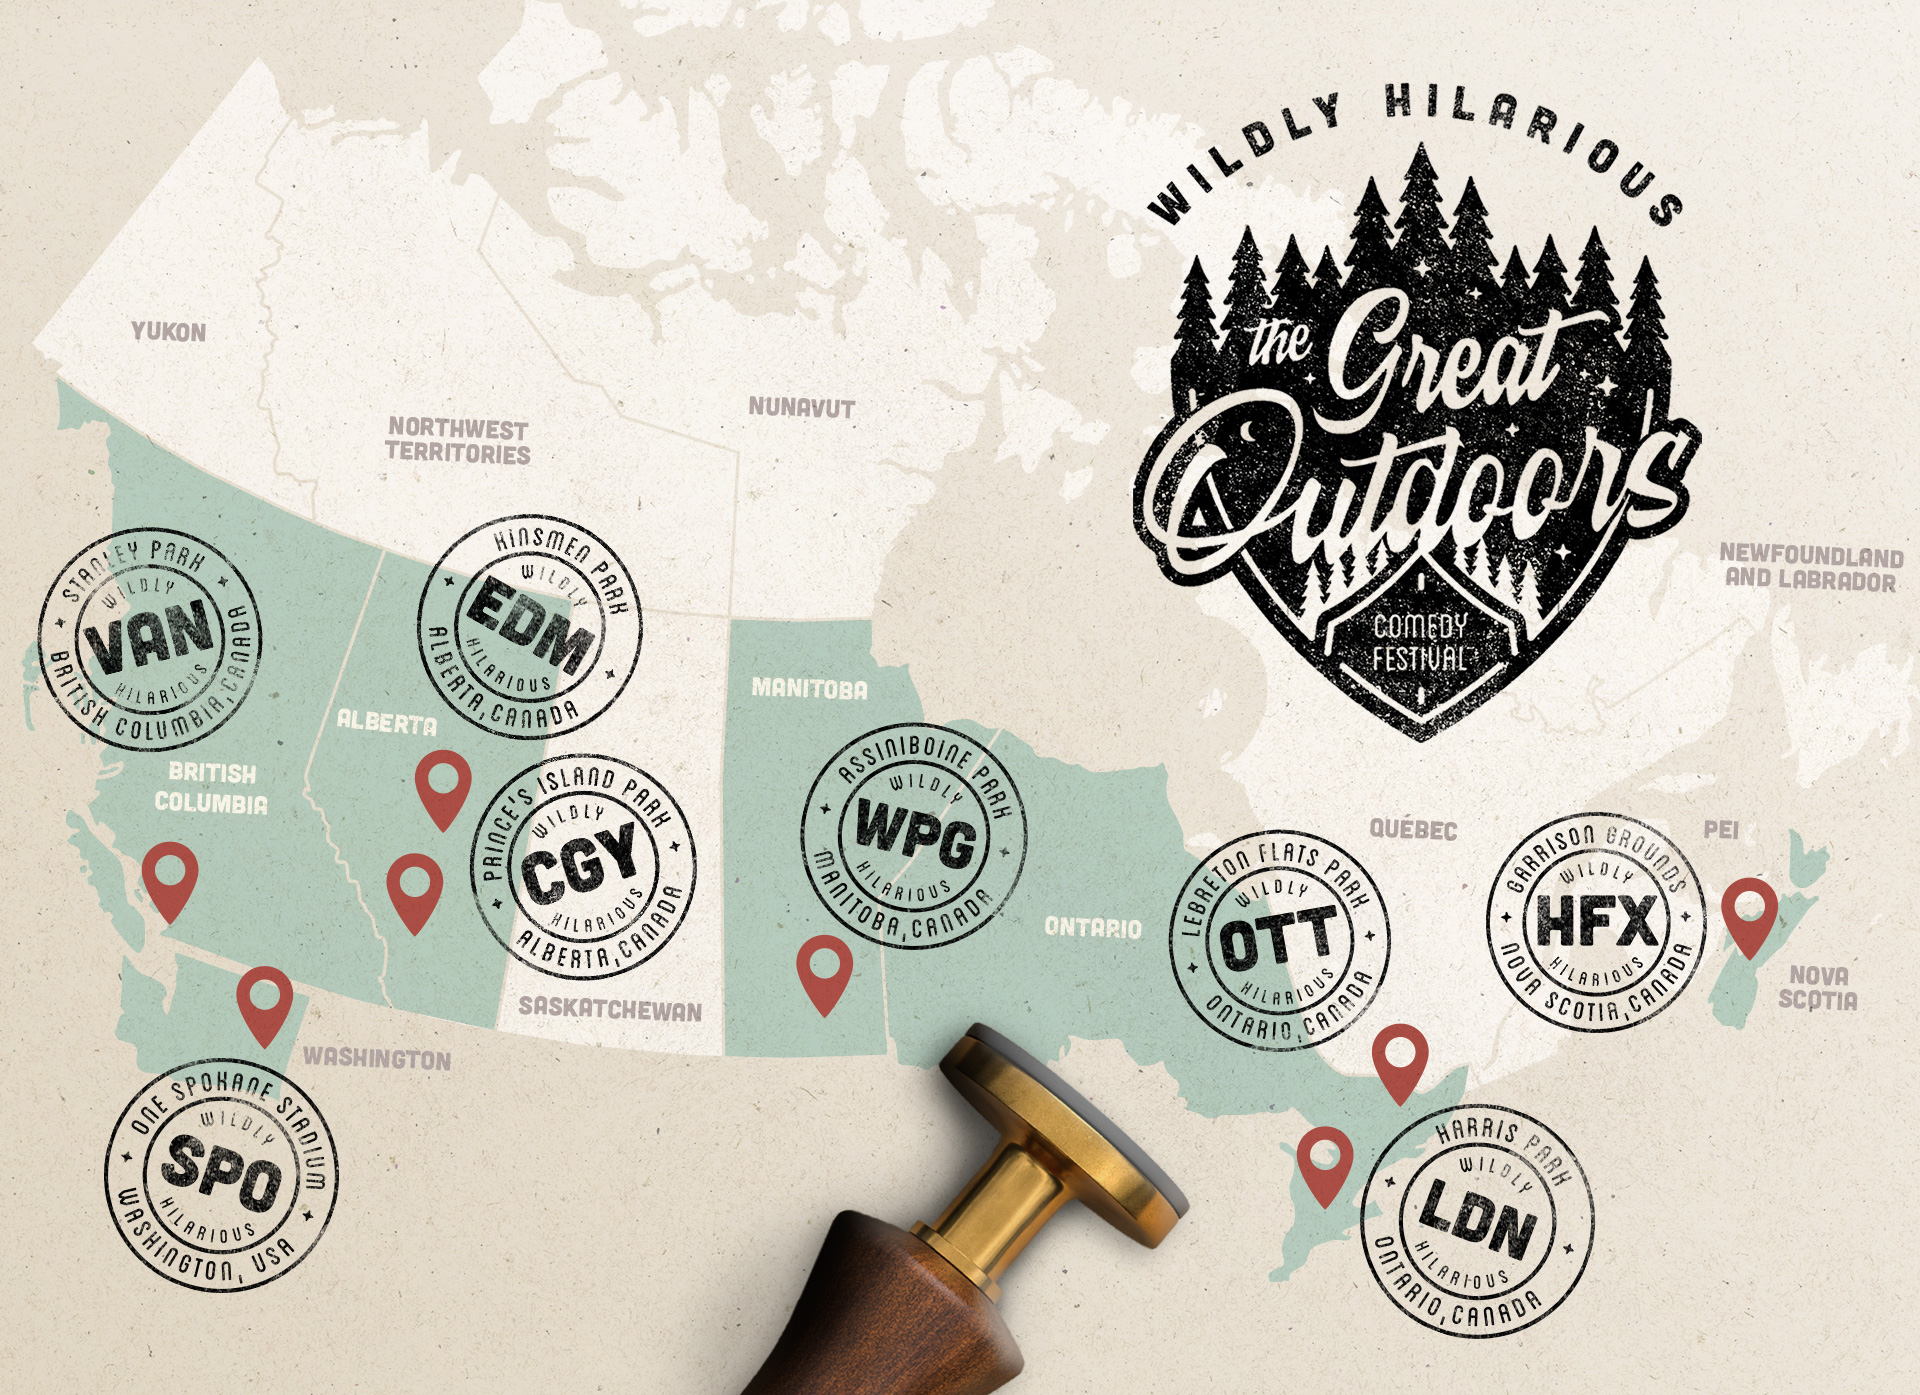 Great Outdoors Comedy Festival - 2024 Cities - Spokane, Vancouver, Edmonton, Calgary, Winnipeg, Ottawa, London, Halifax - Live Comedy Events in incredible outdoor community spaces!